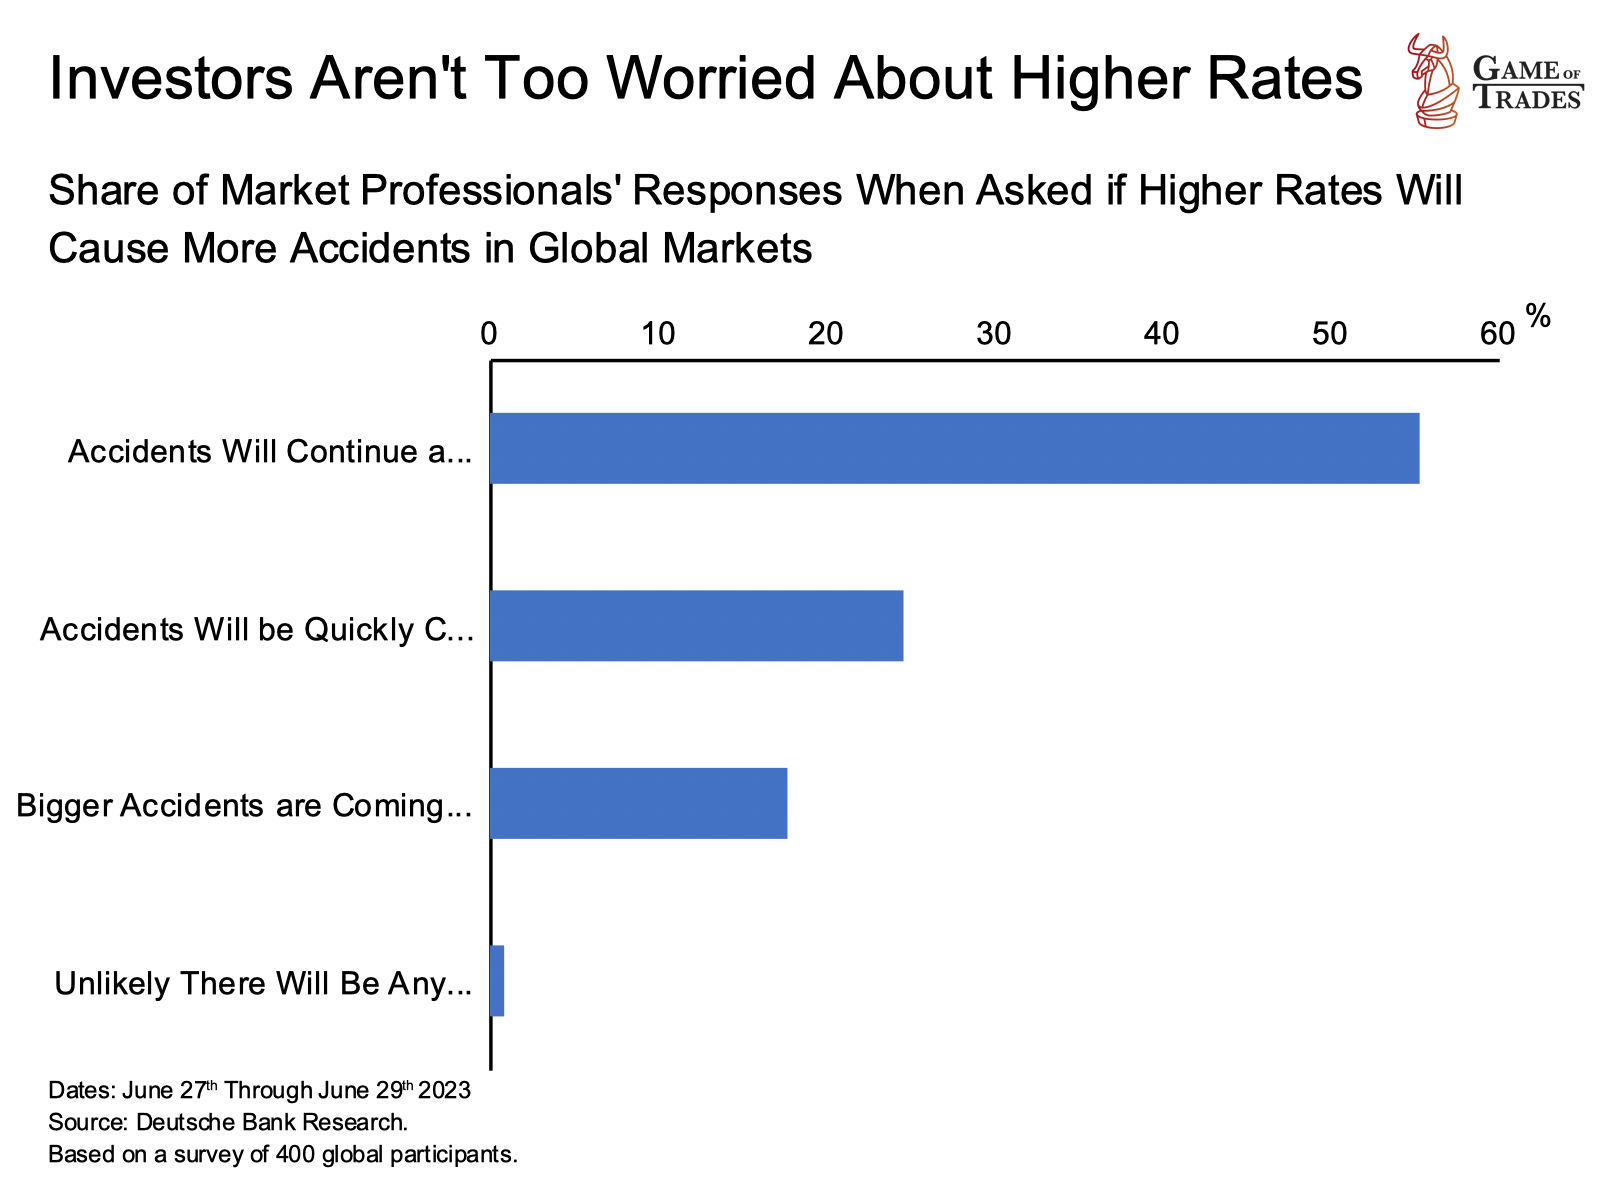 Higher Rate Will Cause More Accidents in Global Markets